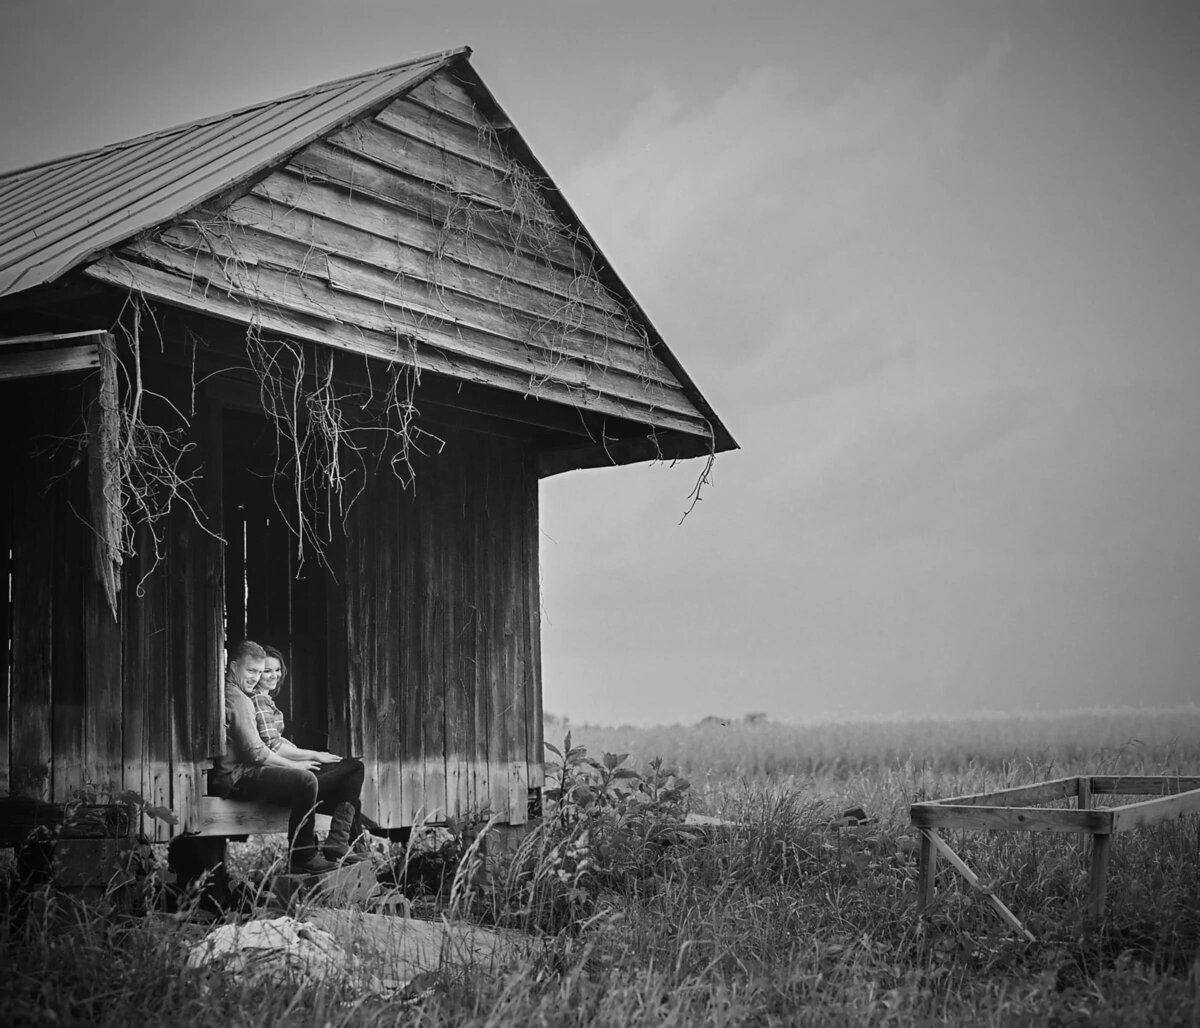 Monochrome image of a woman sitting thoughtfully in a rustic shack on a vast field